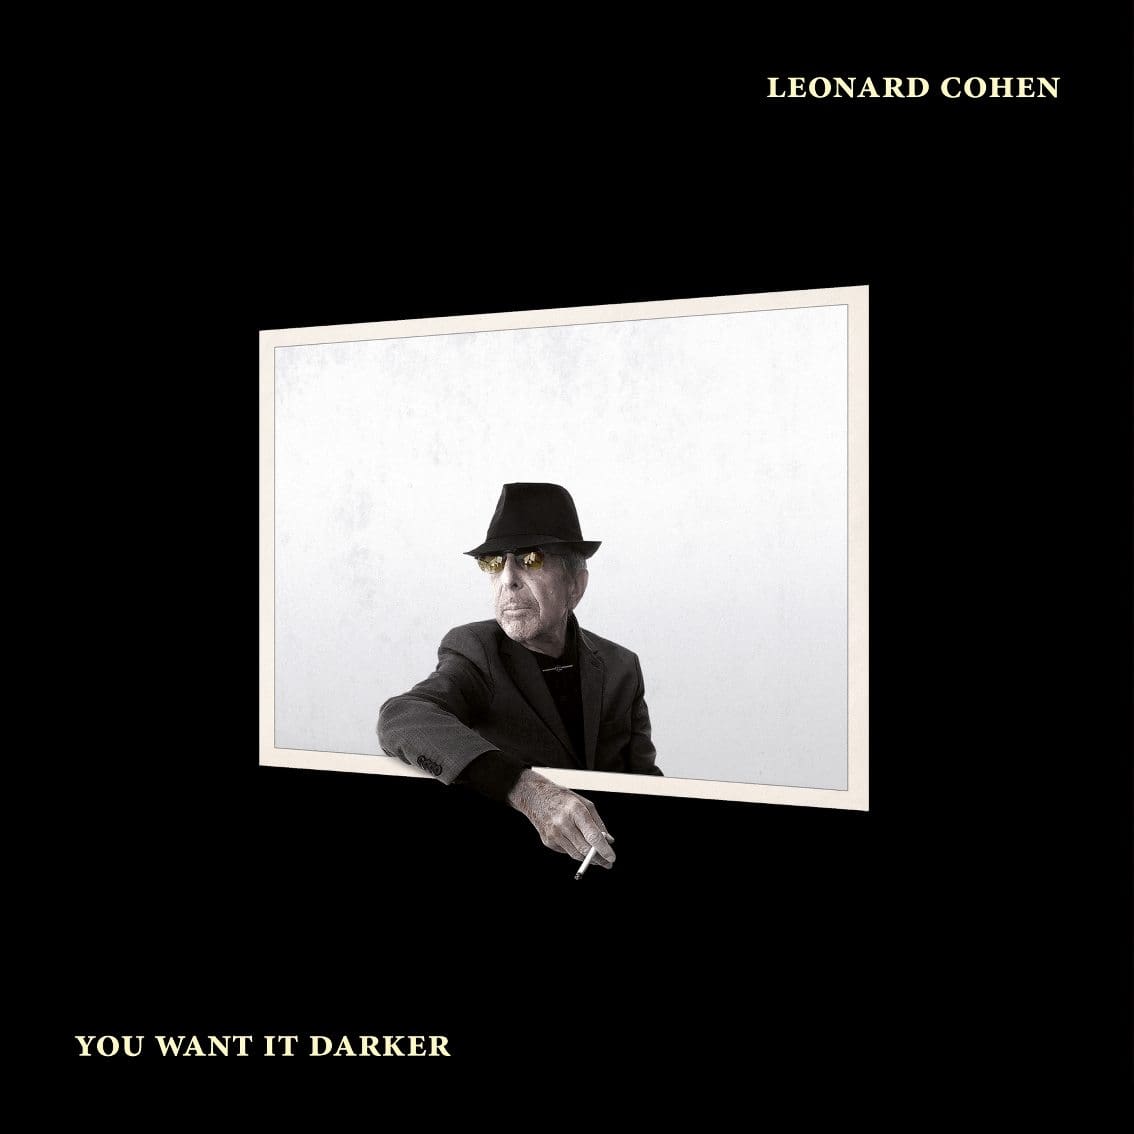 New Leonard Cohen album coming up,'You want it darker', and it might be his last one